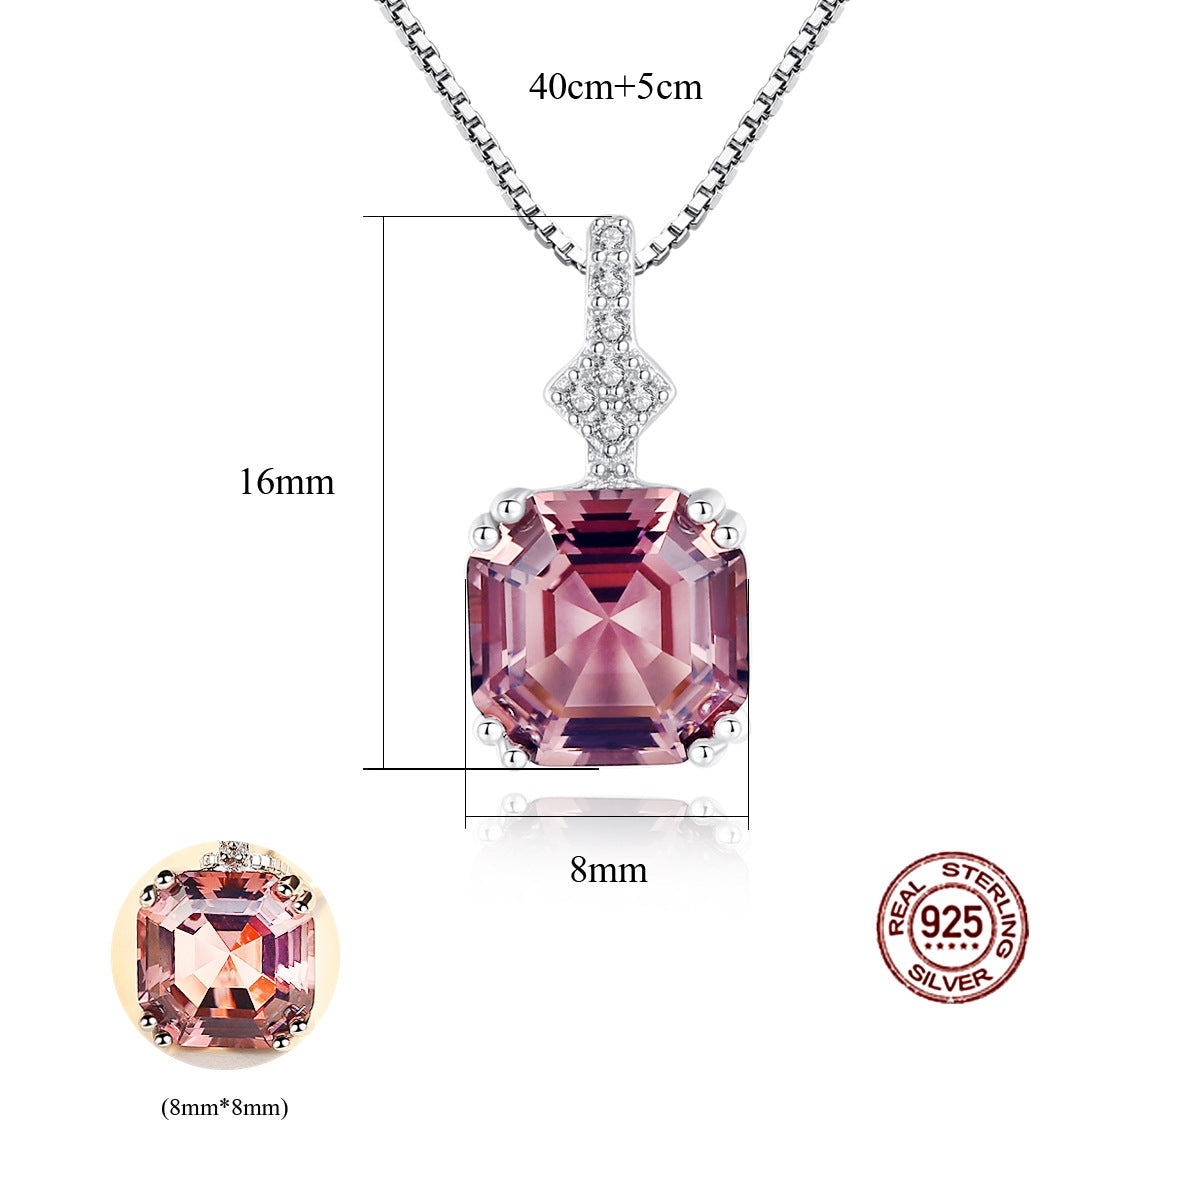 Key to Wealth High Clarity Sugar Cube Morganite S925 Sterling Silver Necklace - SN0106